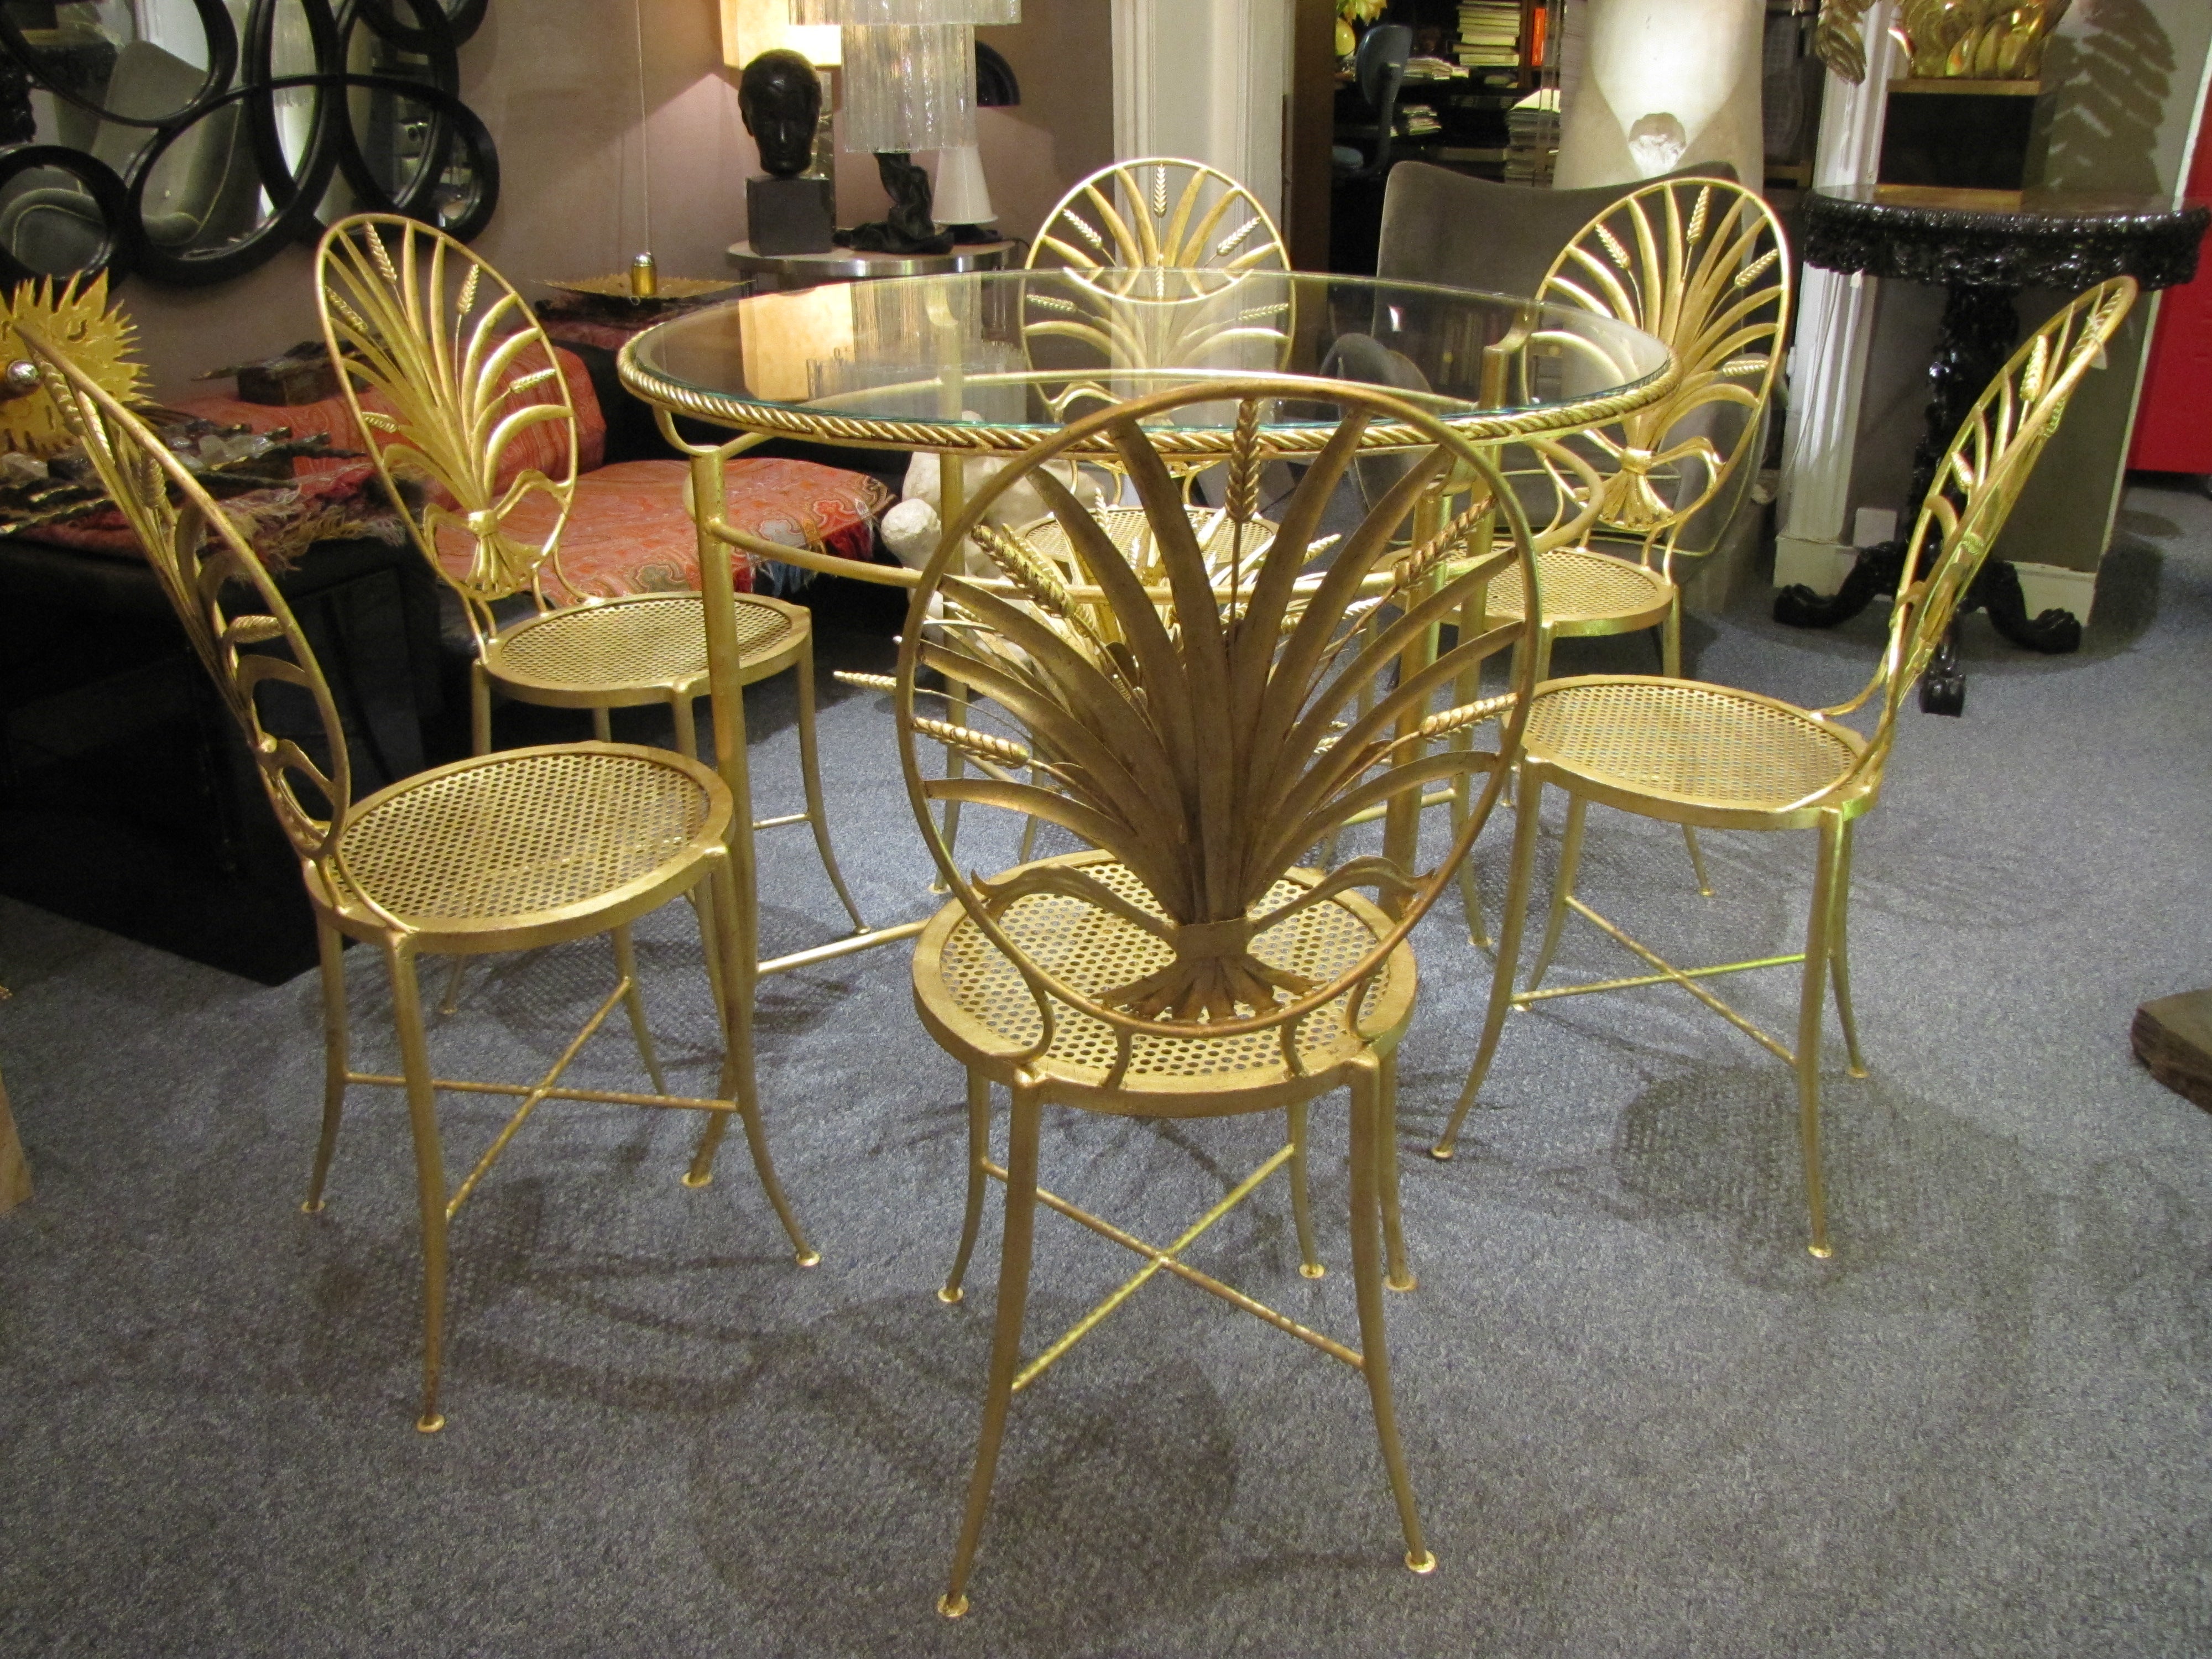 Rare set of 1960s Italian table and six chairs with elaborately detailed backs, in the design of a sheaf of wheat. Raised on gorgeous slim legs with X-stretchers, Classic Italian gilt gold finishing. Made by S. Salvadori - Firenze, circa